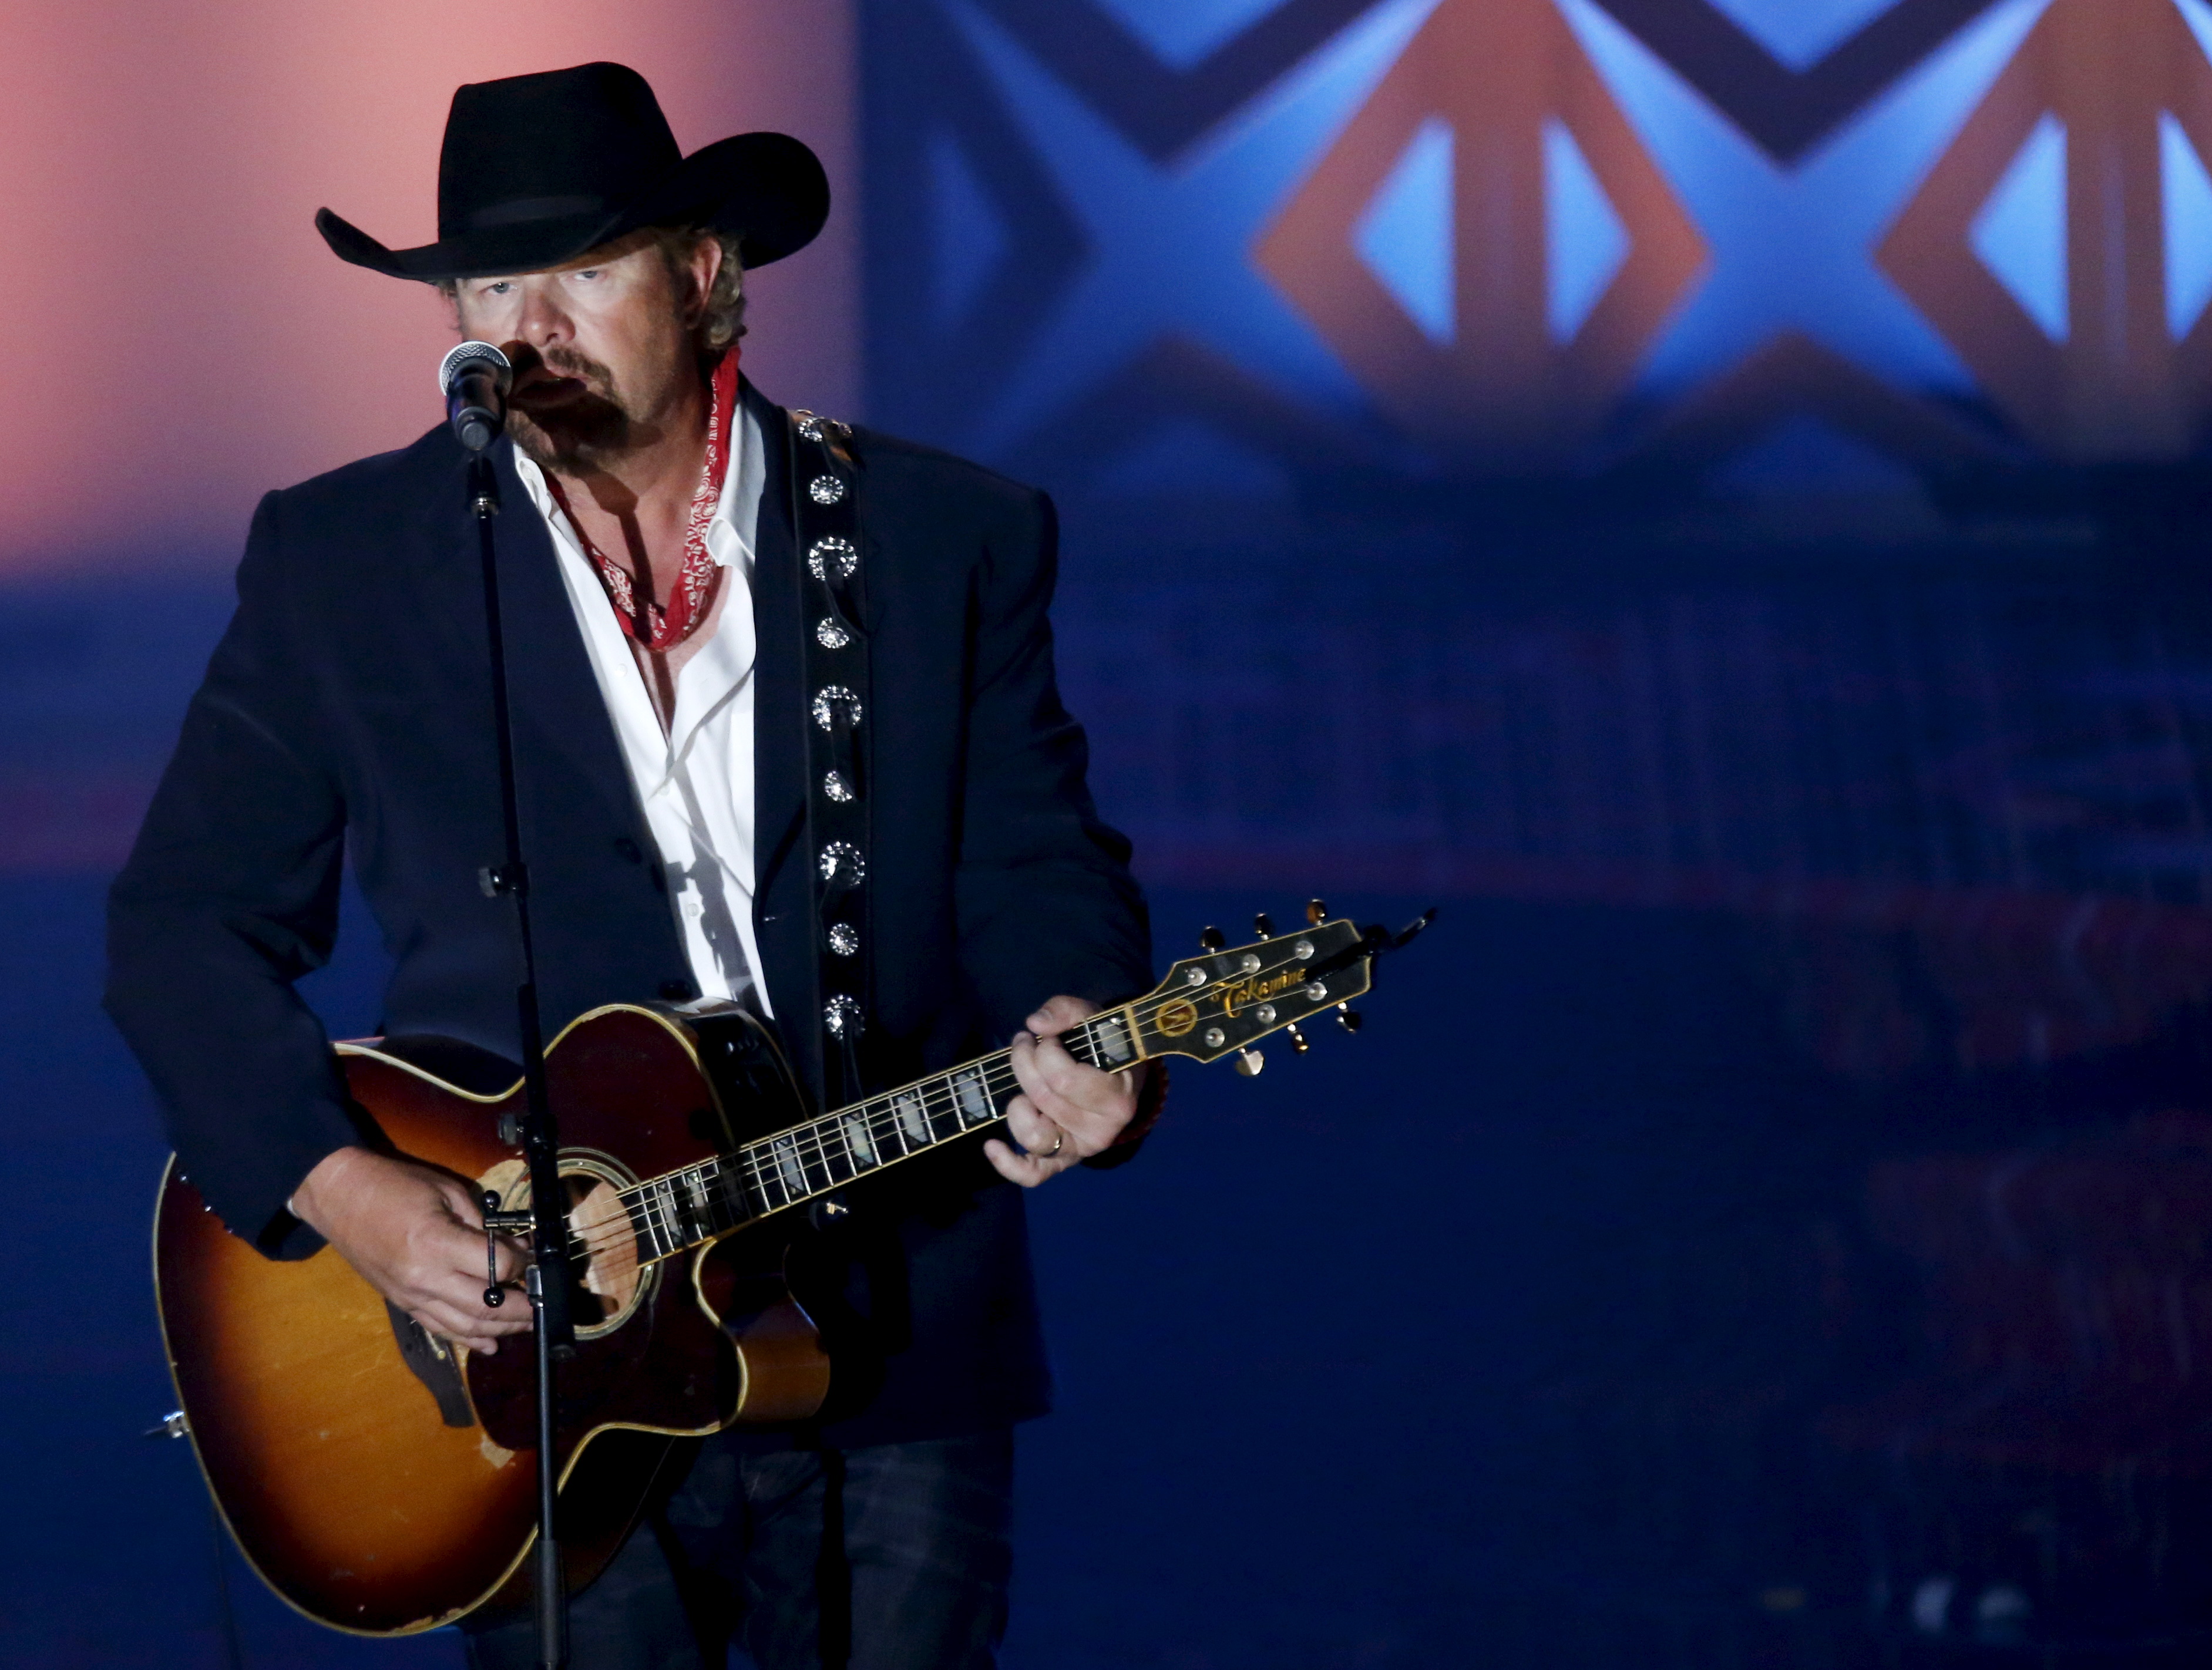 Toby Keith's Desperate Fight For Life After Cancer Diagnosis